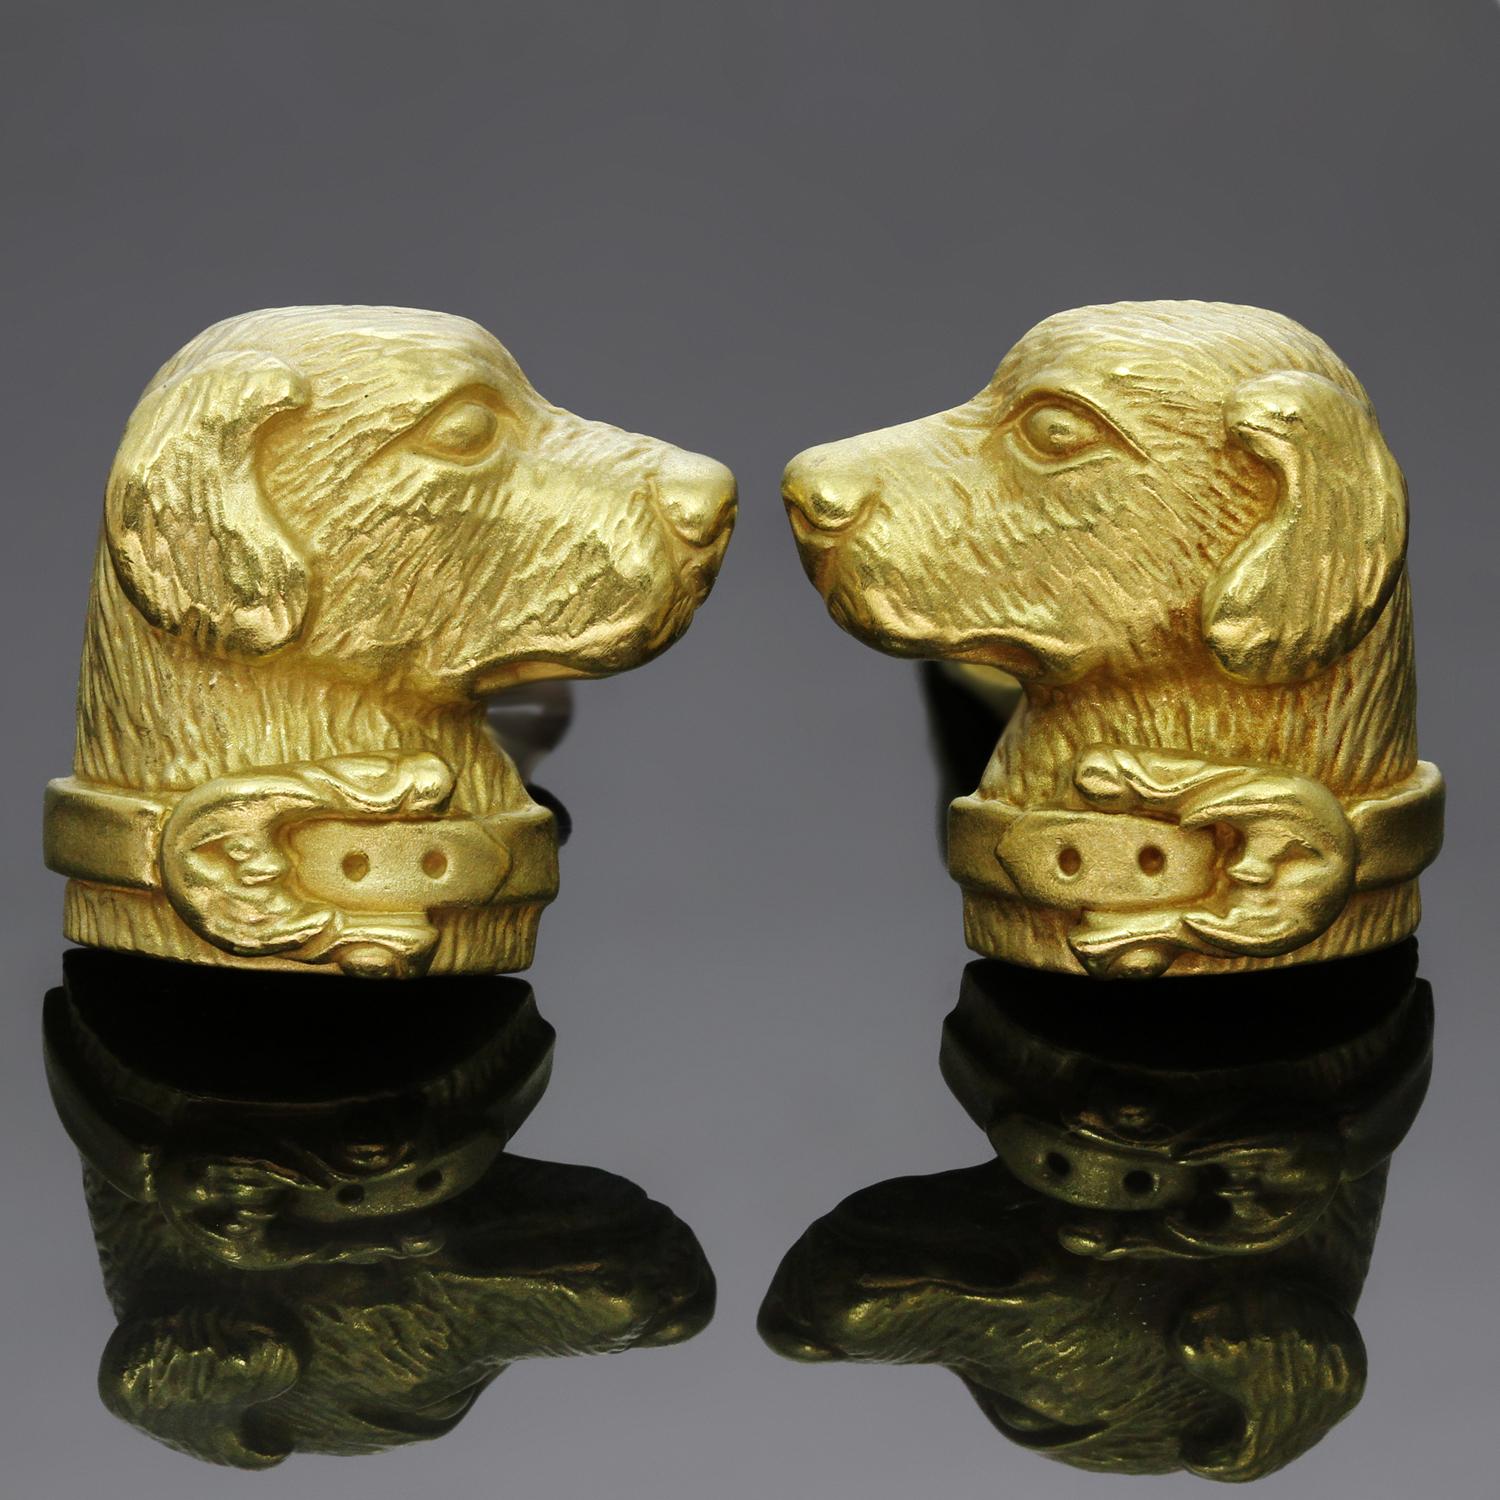 These fabulous Kieselstein-Cord cufflinks in the shape of labrador dogs wearing elegant collars are crafted in beautifully textured 18k yellow gold.  Made in United States circa 1989. Measurements: 0.62